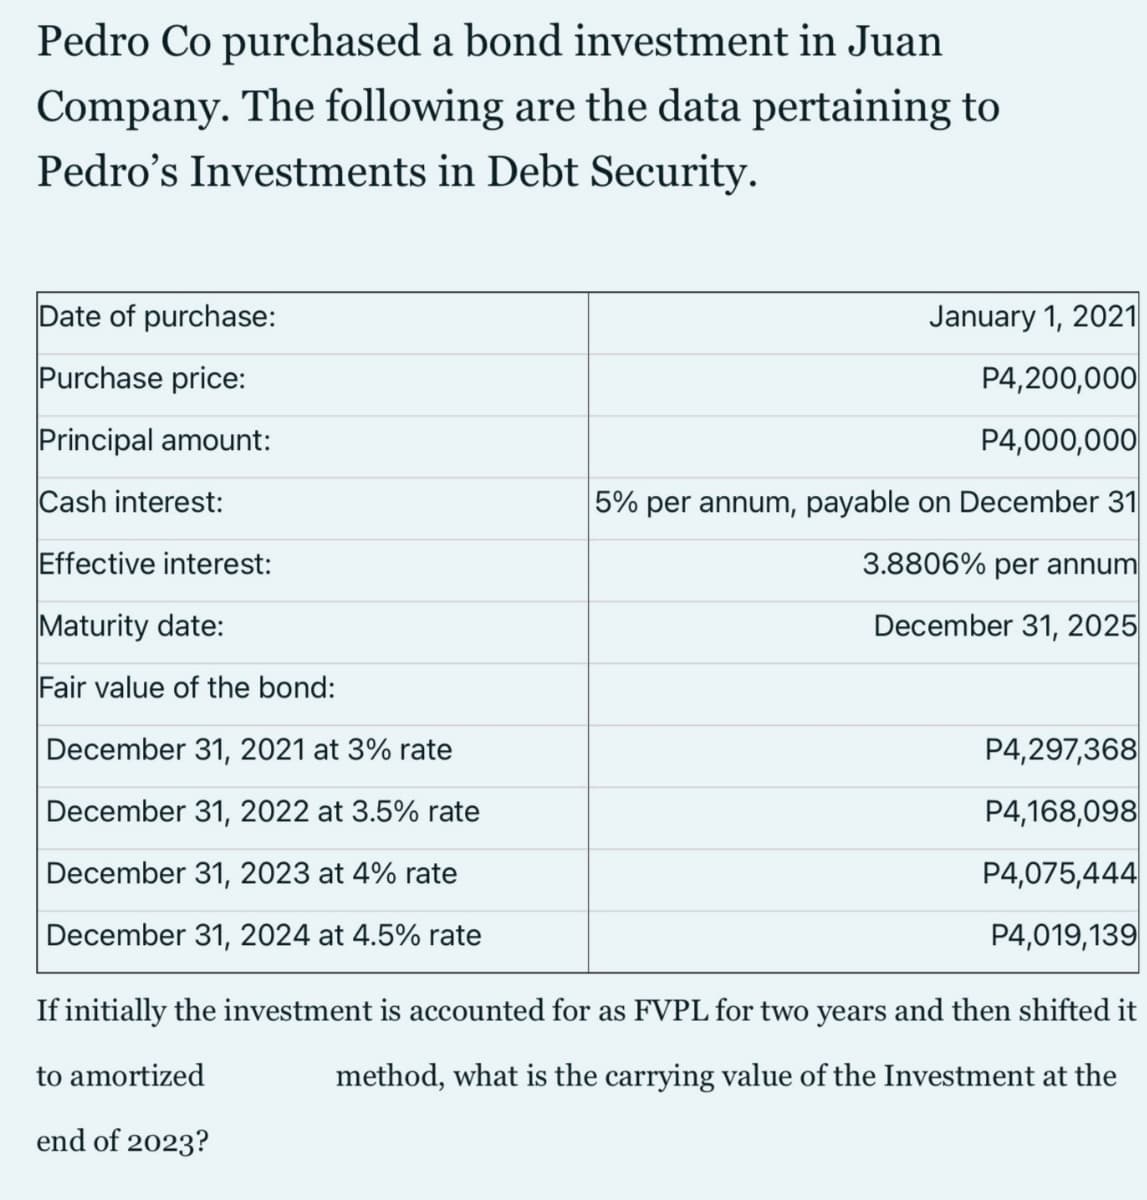 Pedro Co purchased a bond investment in Juan
Company. The following are the data pertaining to
Pedro's Investments in Debt Security.
Date of purchase:
January 1, 2021
Purchase price:
P4,200,000
Principal amount:
P4,000,000
Cash interest:
5% per annum, payable on December 31
Effective interest:
3.8806% per annum
Maturity date:
December 31, 2025
Fair value of the bond:
December 31, 2021 at 3% rate
P4,297,368
December 31, 2022 at 3.5% rate
P4,168,098
December 31, 2023 at 4% rate
P4,075,444
December 31, 2024 at 4.5% rate
P4,019,139
If initially the investment is accounted for as FVPL for two years and then shifted it
to amortized
method, what is the carrying value of the Investment at the
end of 2023?
